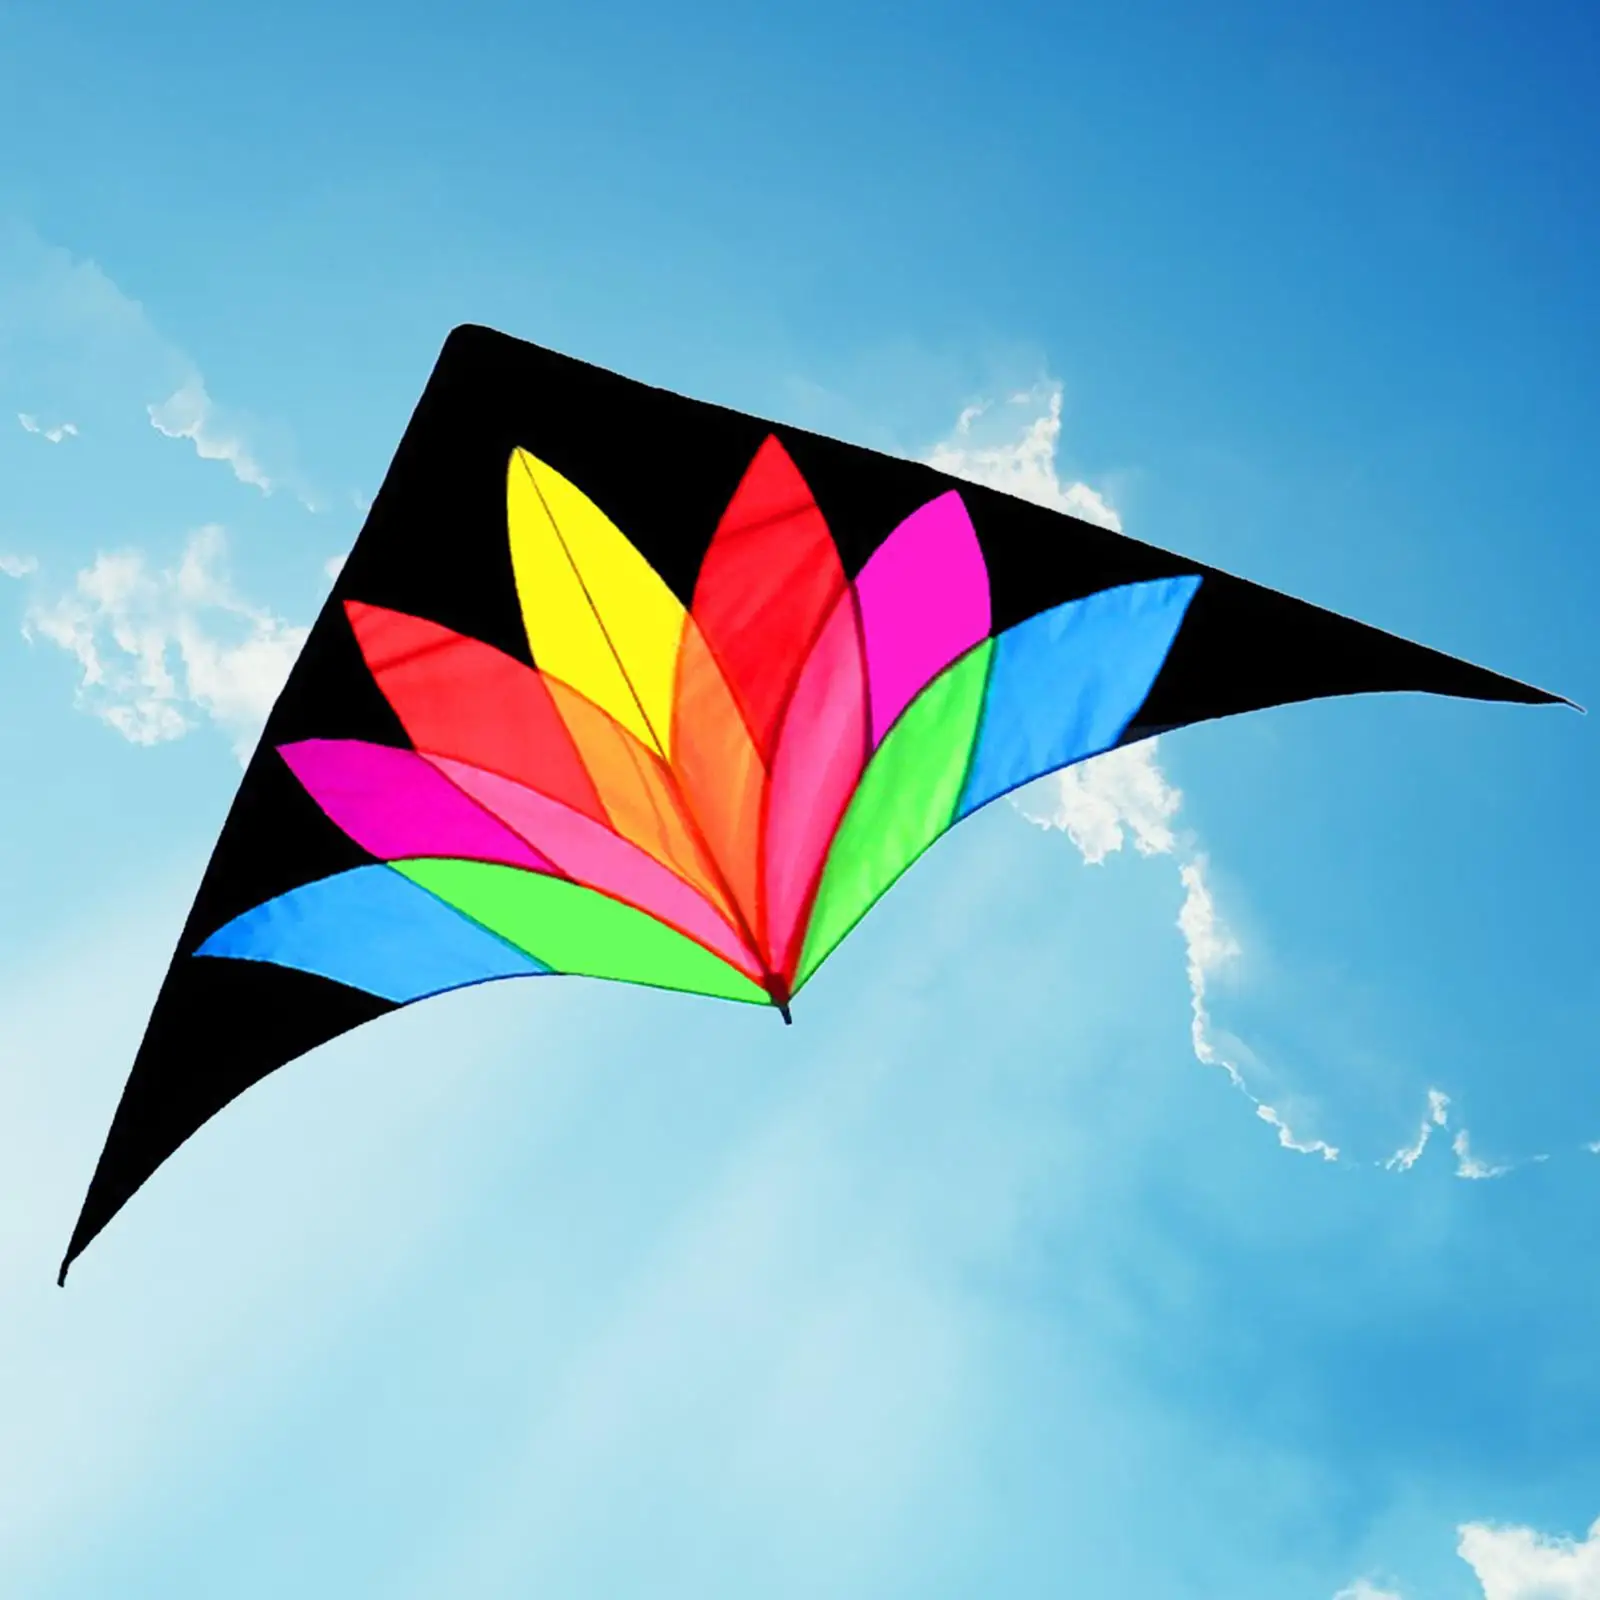 Giant Delta Kite Durable Multi Color Sports Kite Huge Kite for Adults for Holiday Outdoor Game Trip Family Parties Birthday Gift